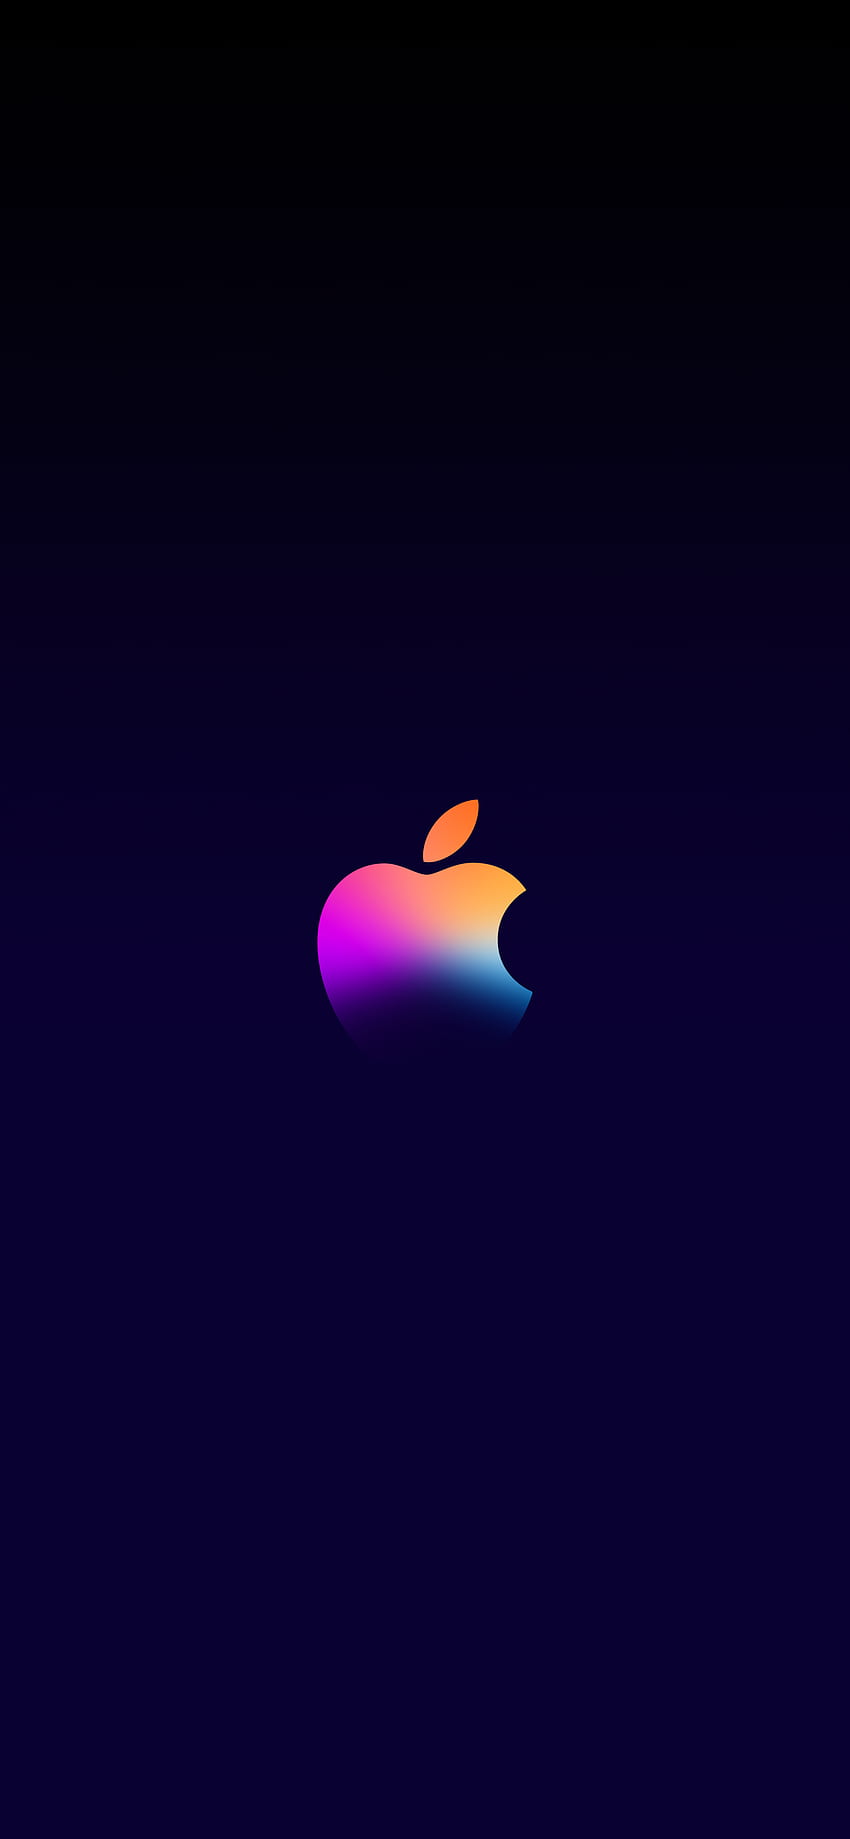 Apple Event One More Thing - Central in 2021. Apple logo iphone, Apple iphone, Apple HD phone wallpaper